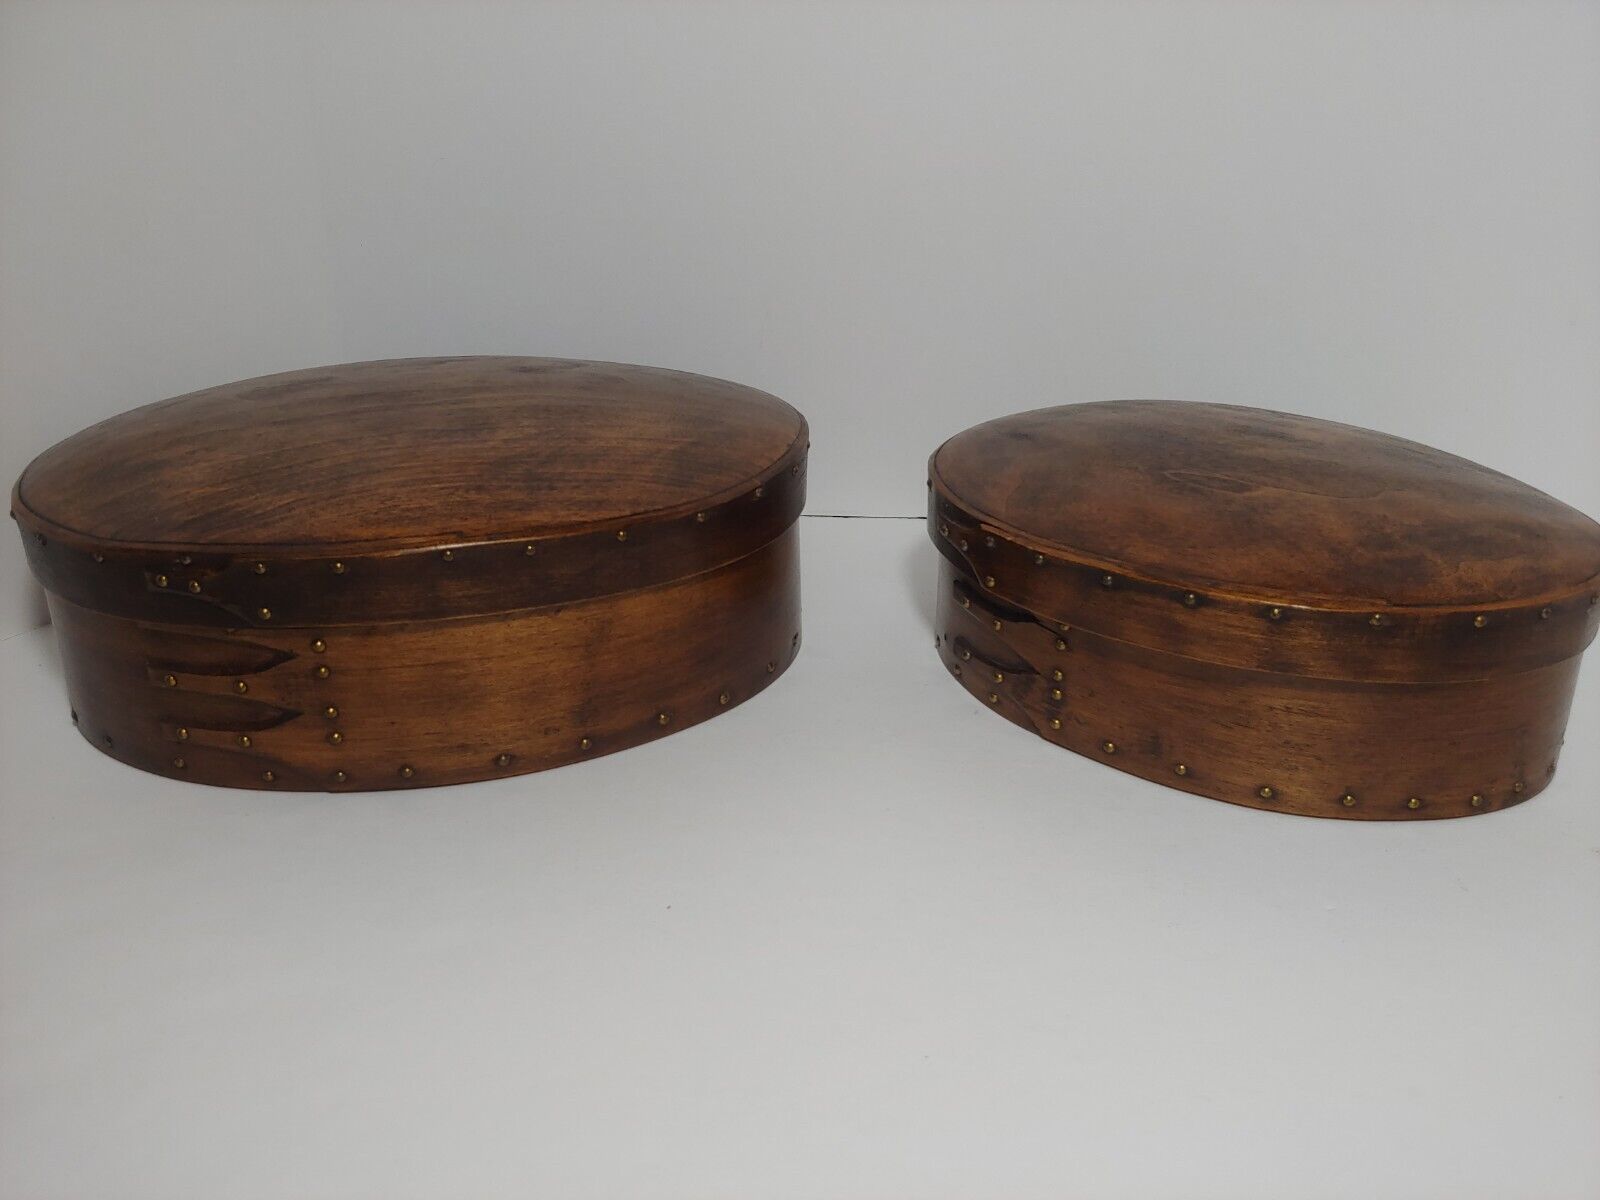 Vintage Signed Jack L Johnson Morehead KY 1994 Hand Made Maple Oval Shaker Boxes